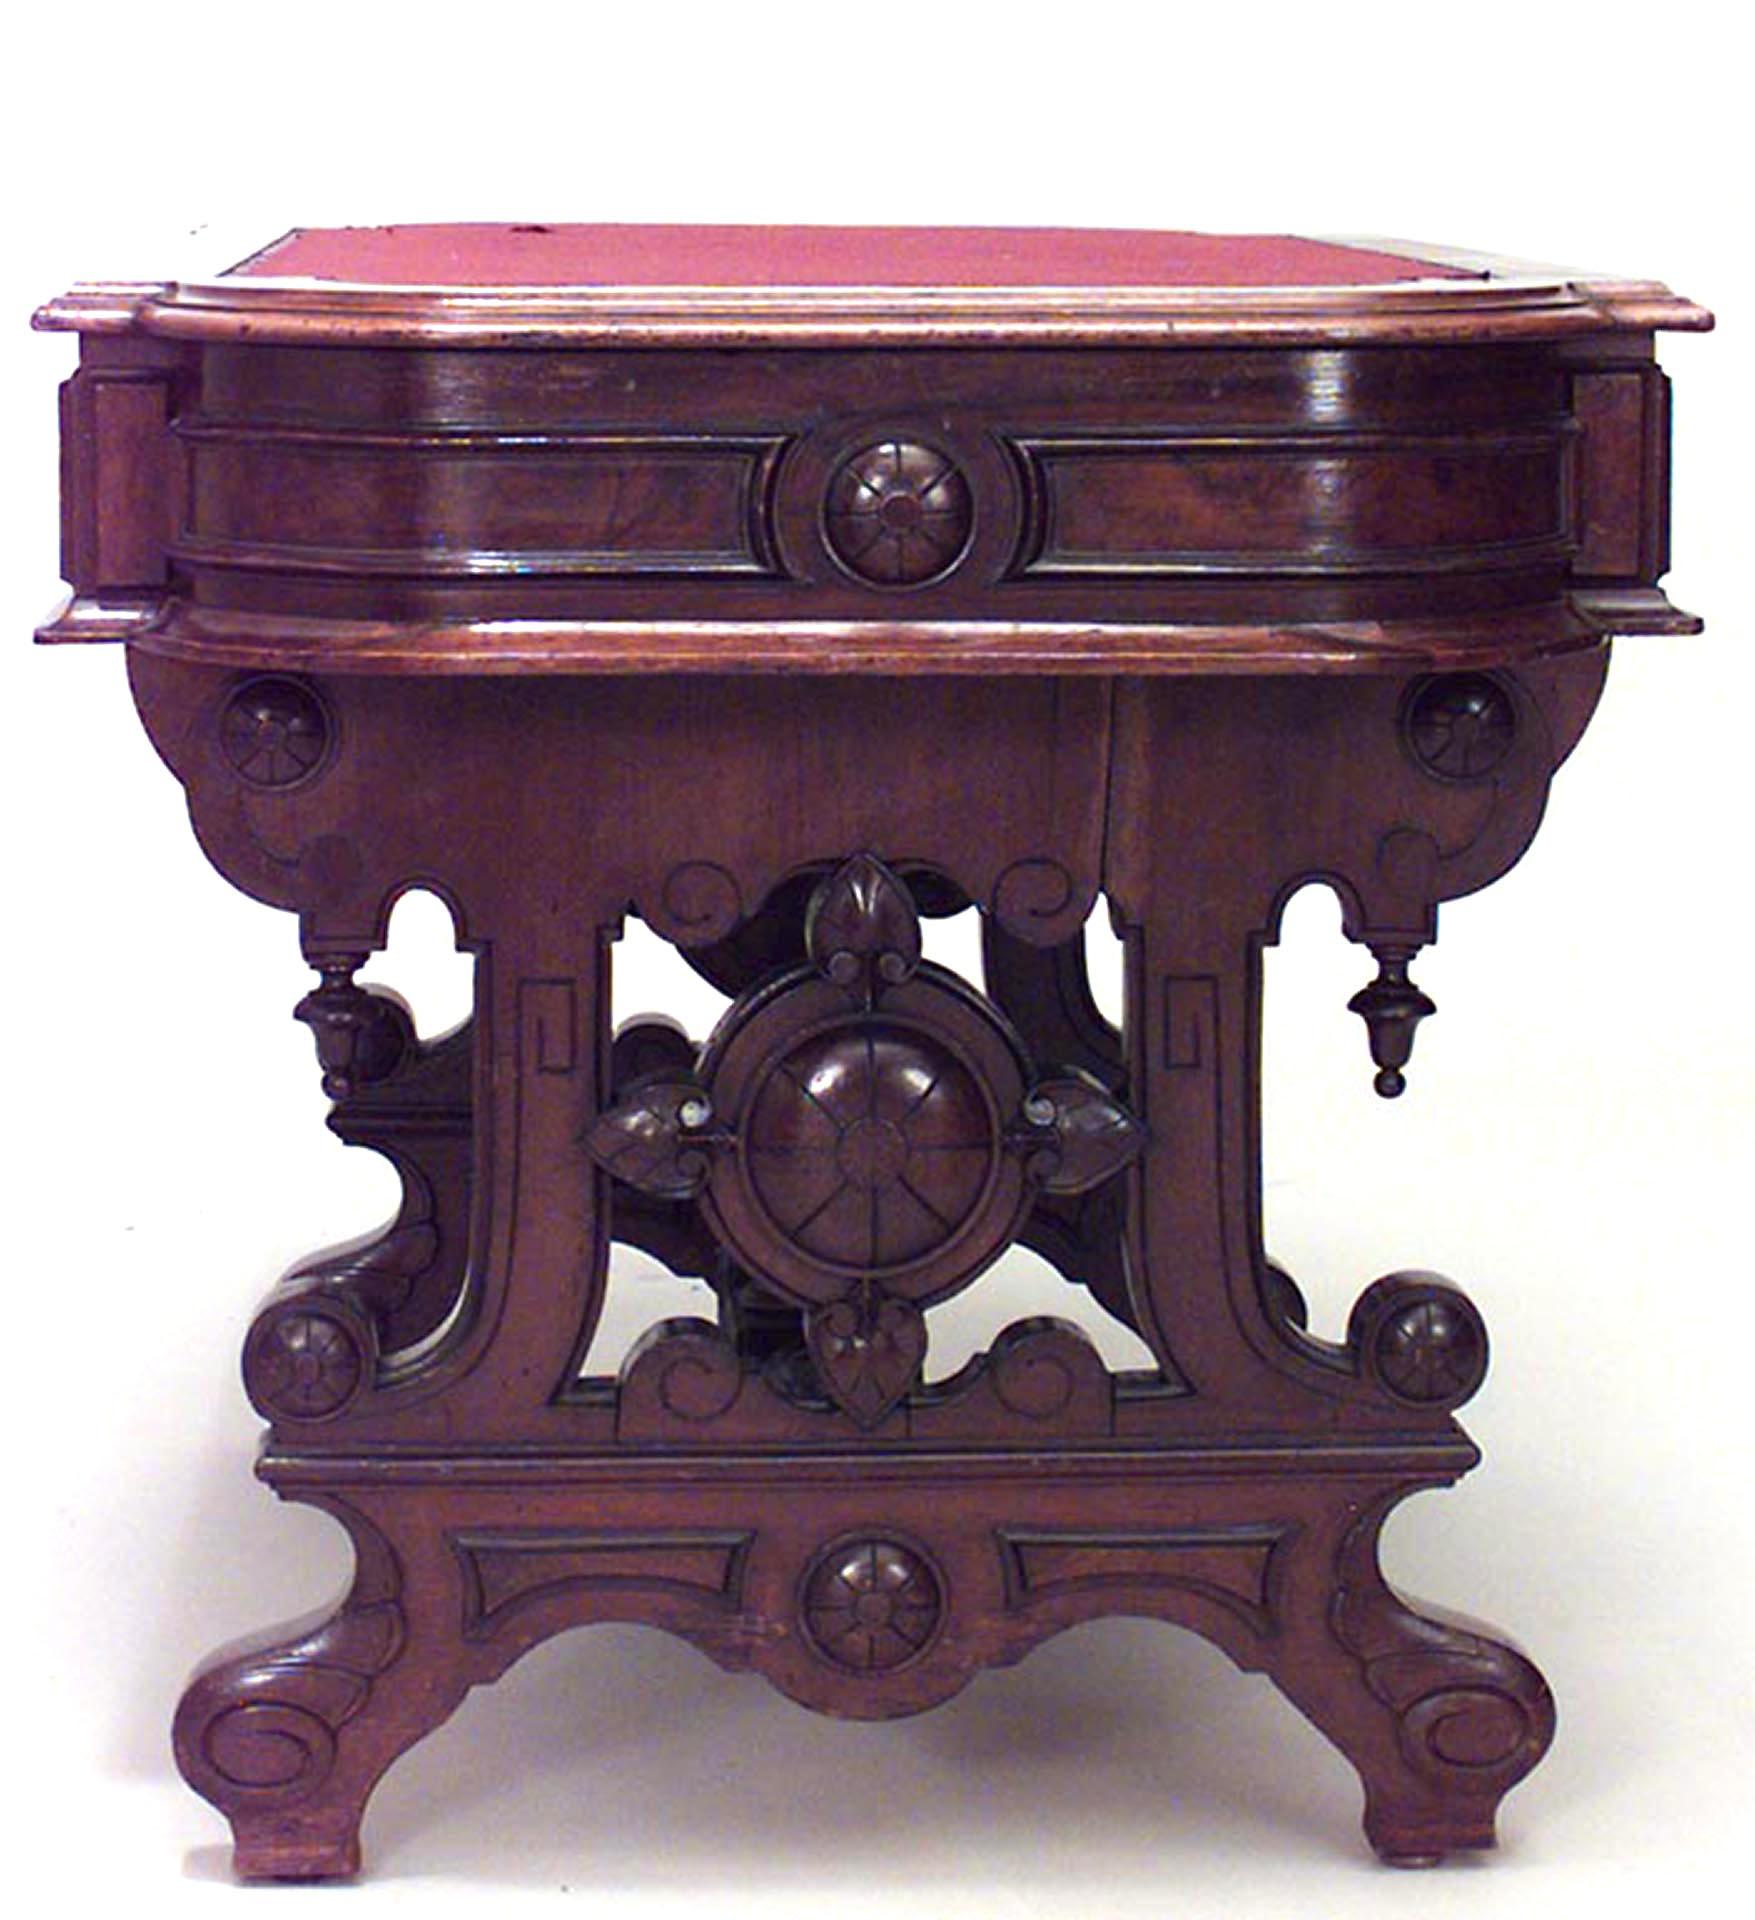 American Victorian burl walnut 2 drawer table desk with stretcher and red felt top.
